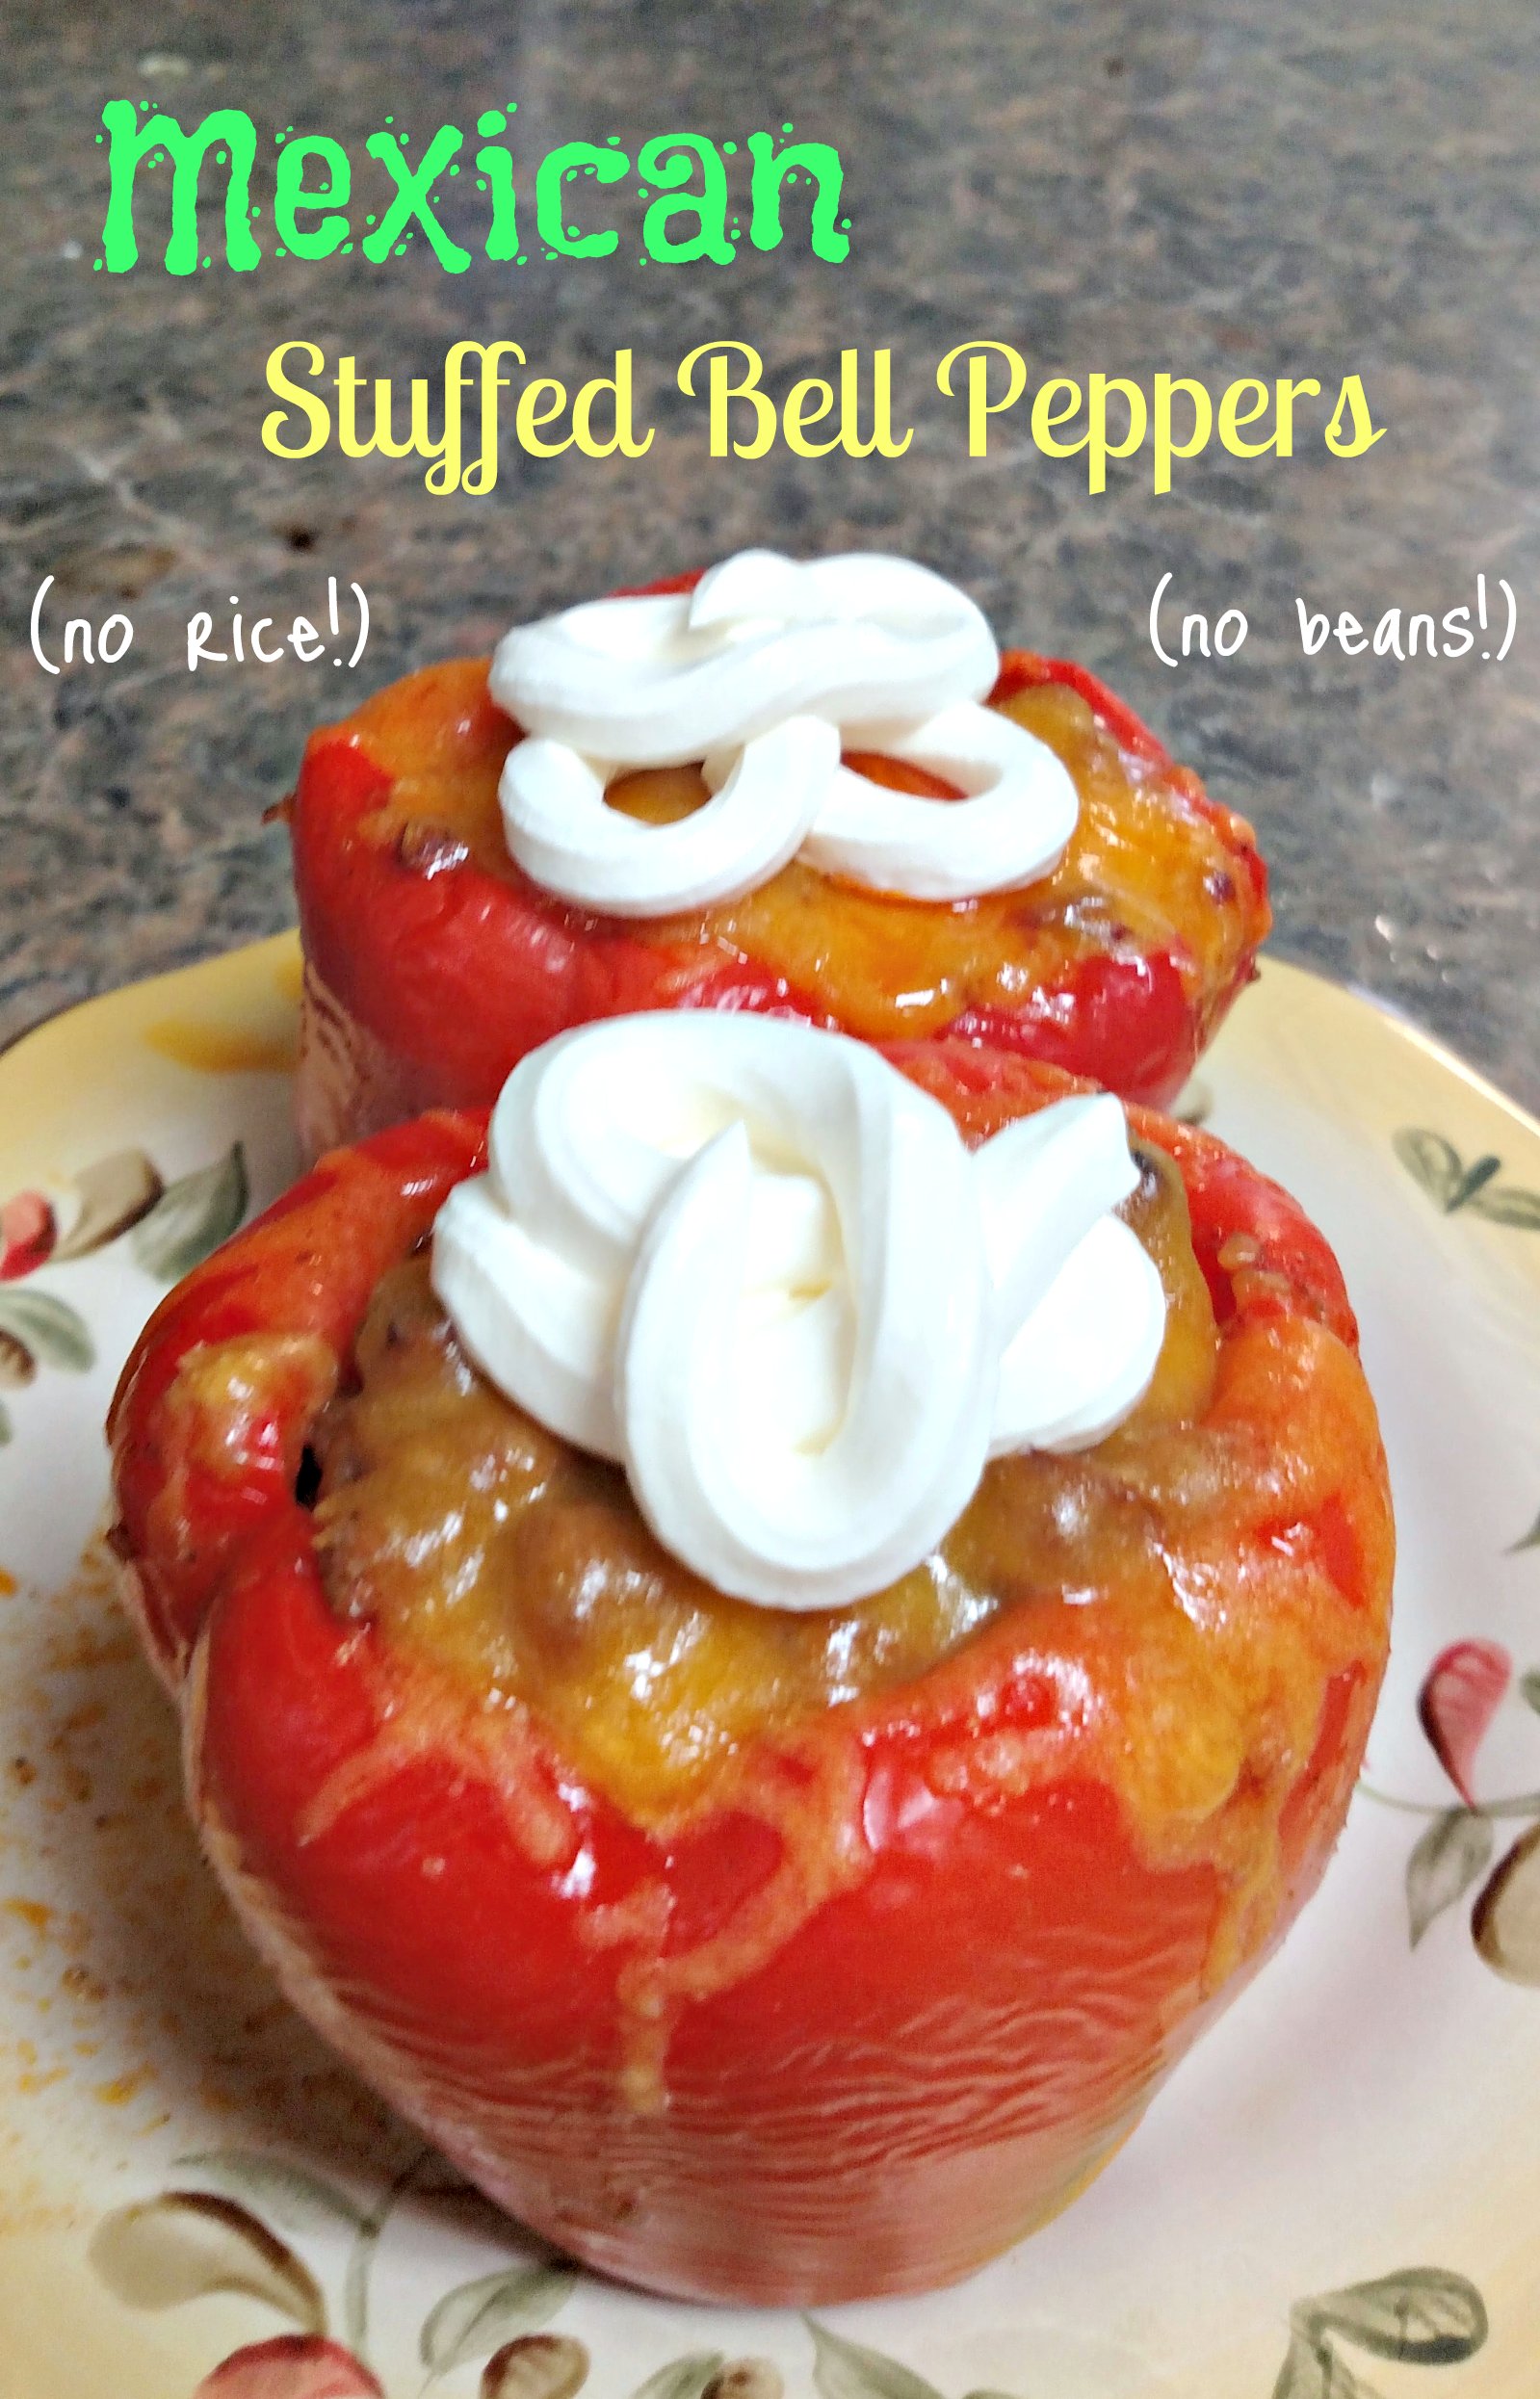 Mexican stuffed Bell Peppers with No Rice